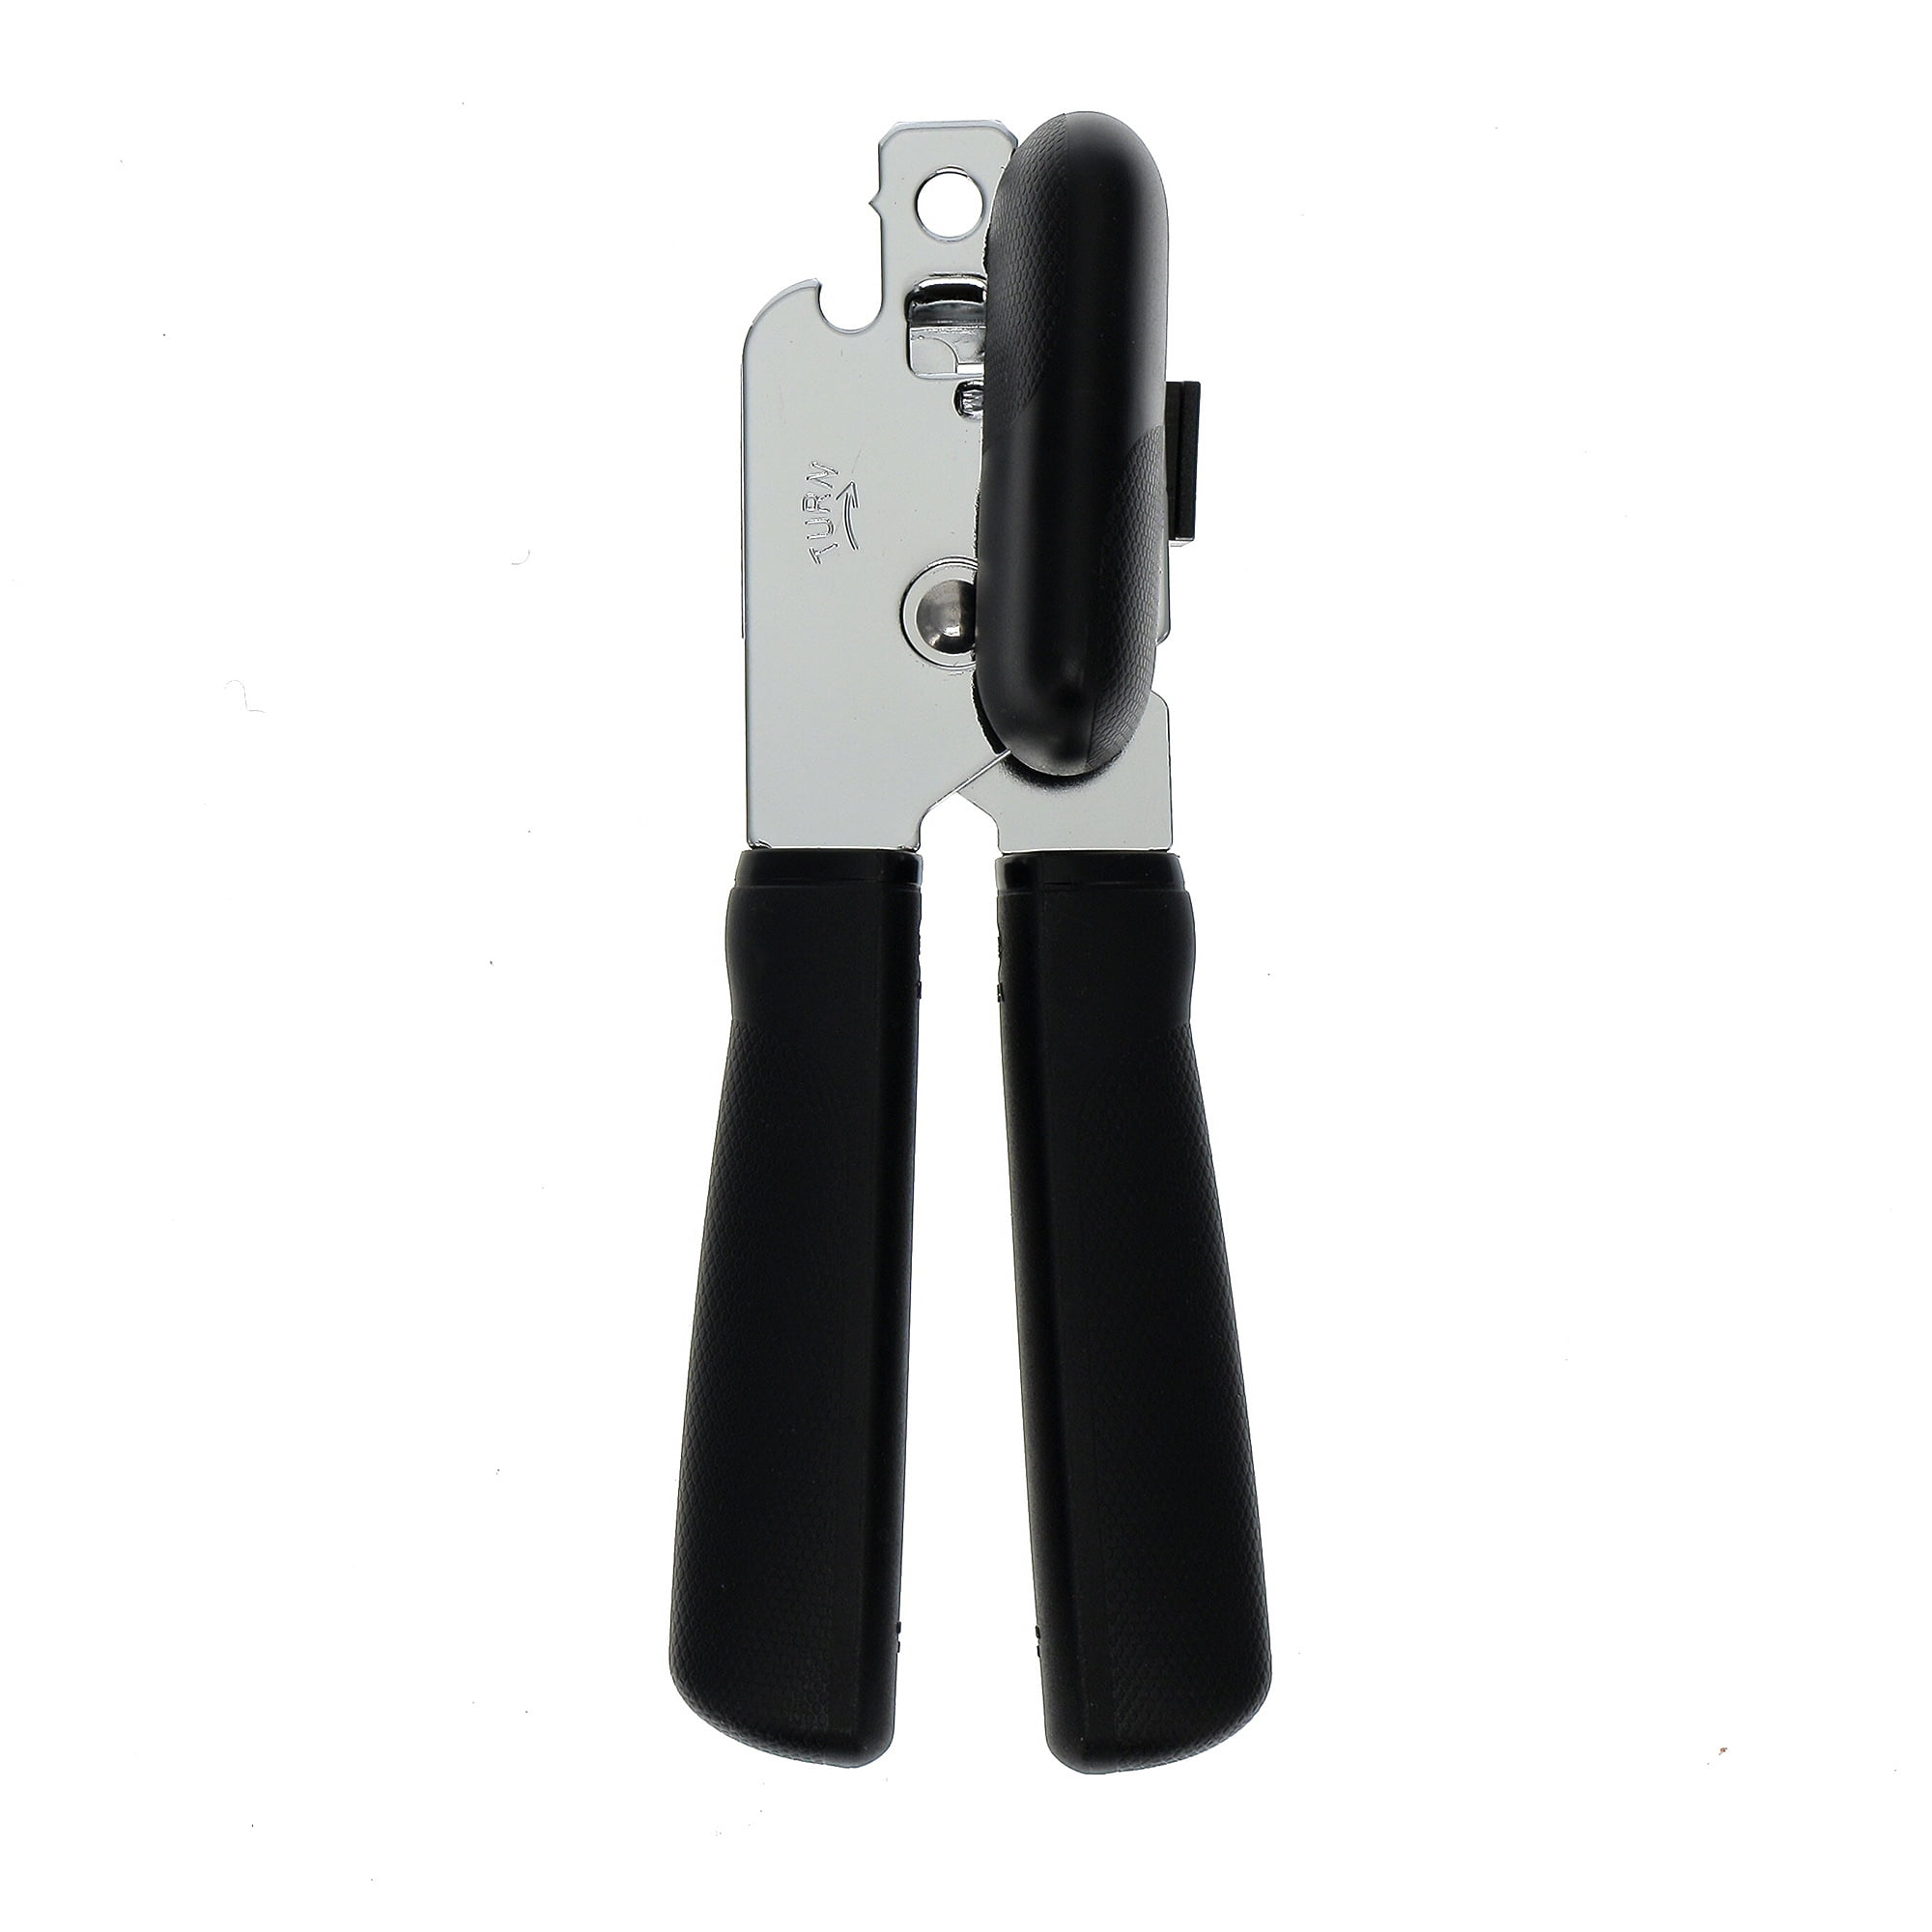 Black Stainless Steel Smooth-Edge Manual Can Opener - 7 1/2L x 4 1/2W x 2  1/4H